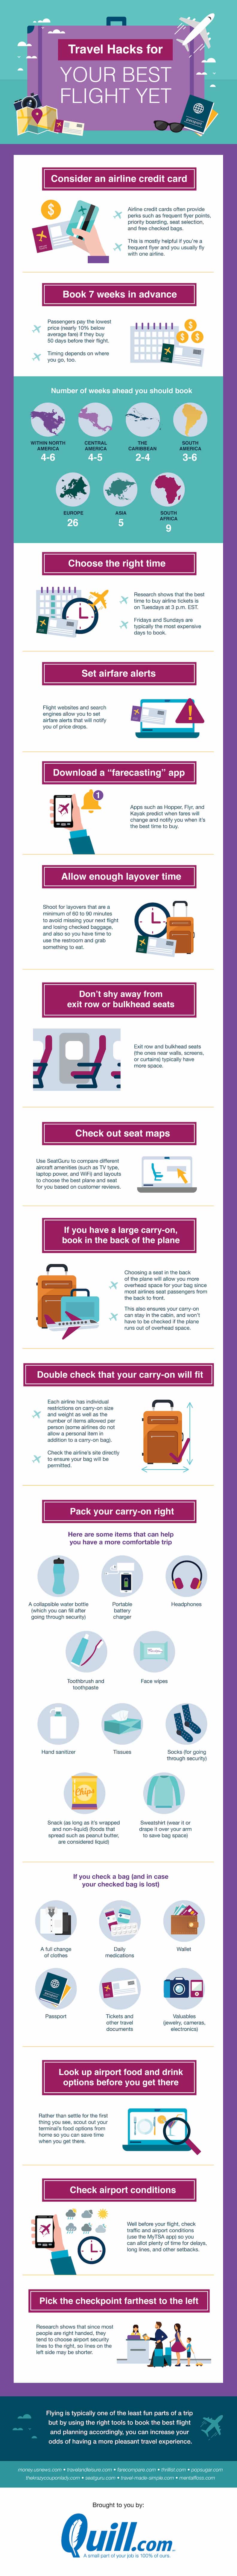 best flight infographic on the travel bunny blog